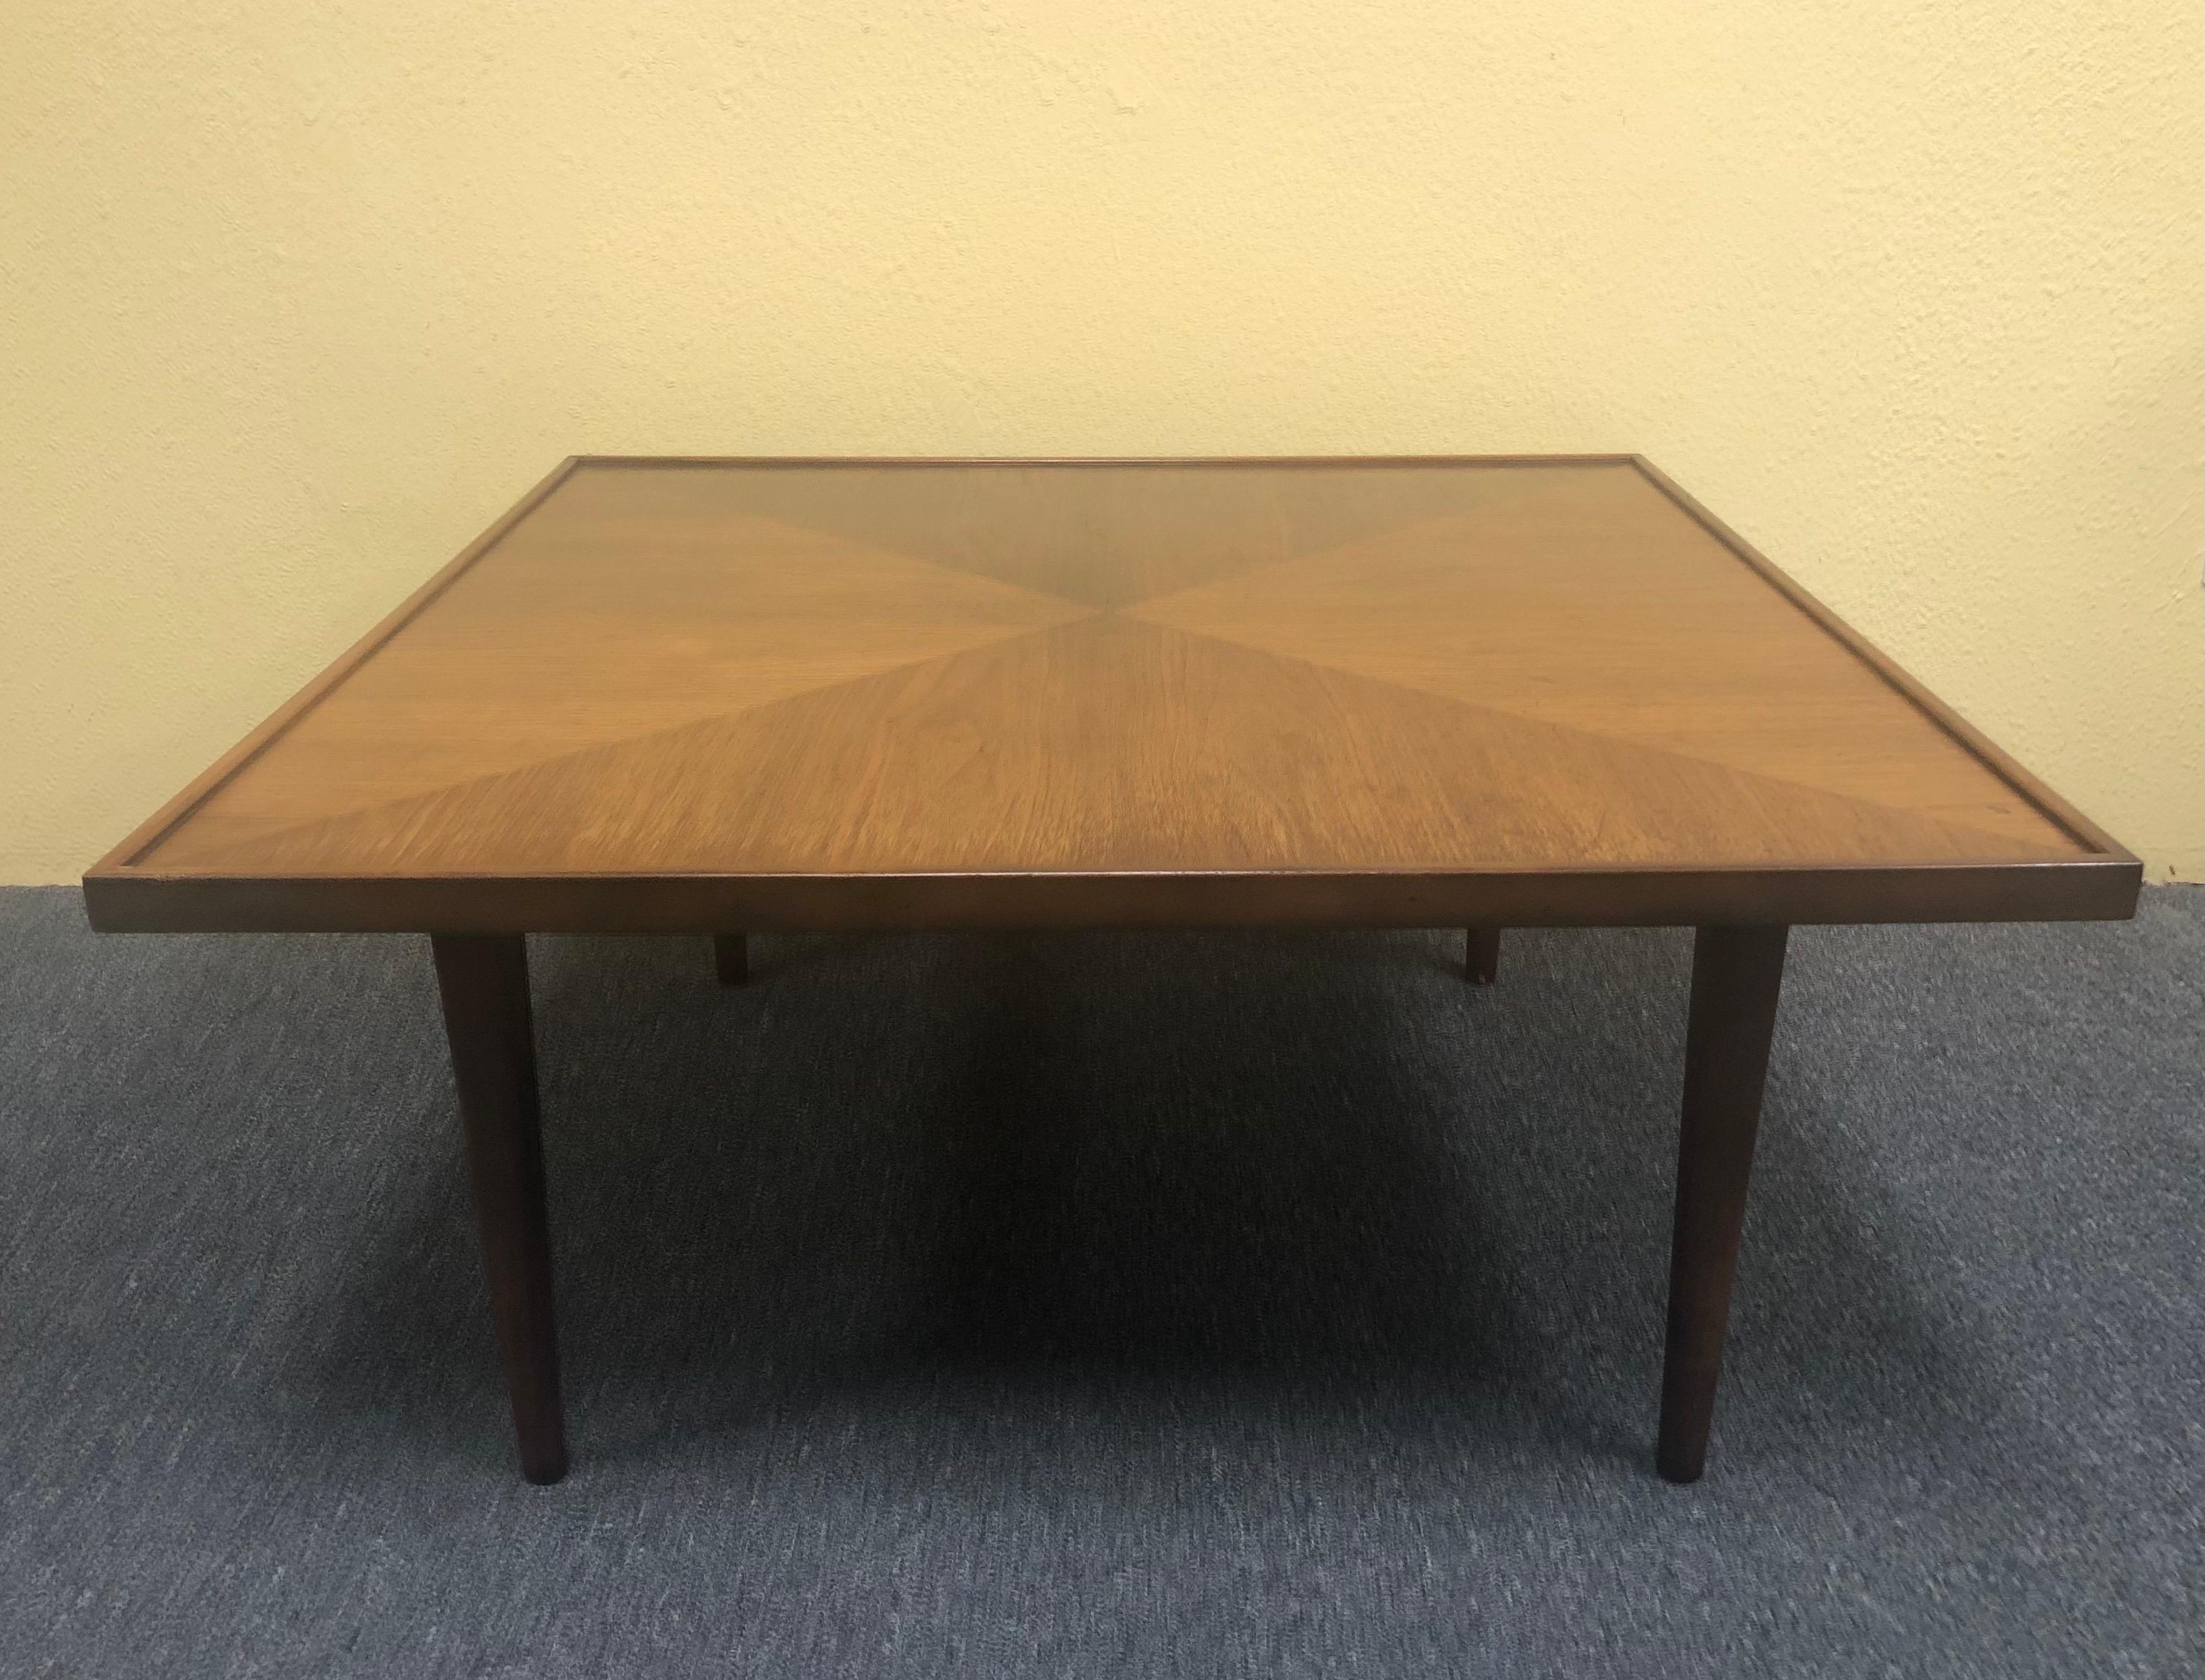 Mid-Century Modern square coffee table in walnut, circa 1970s. The table is 32